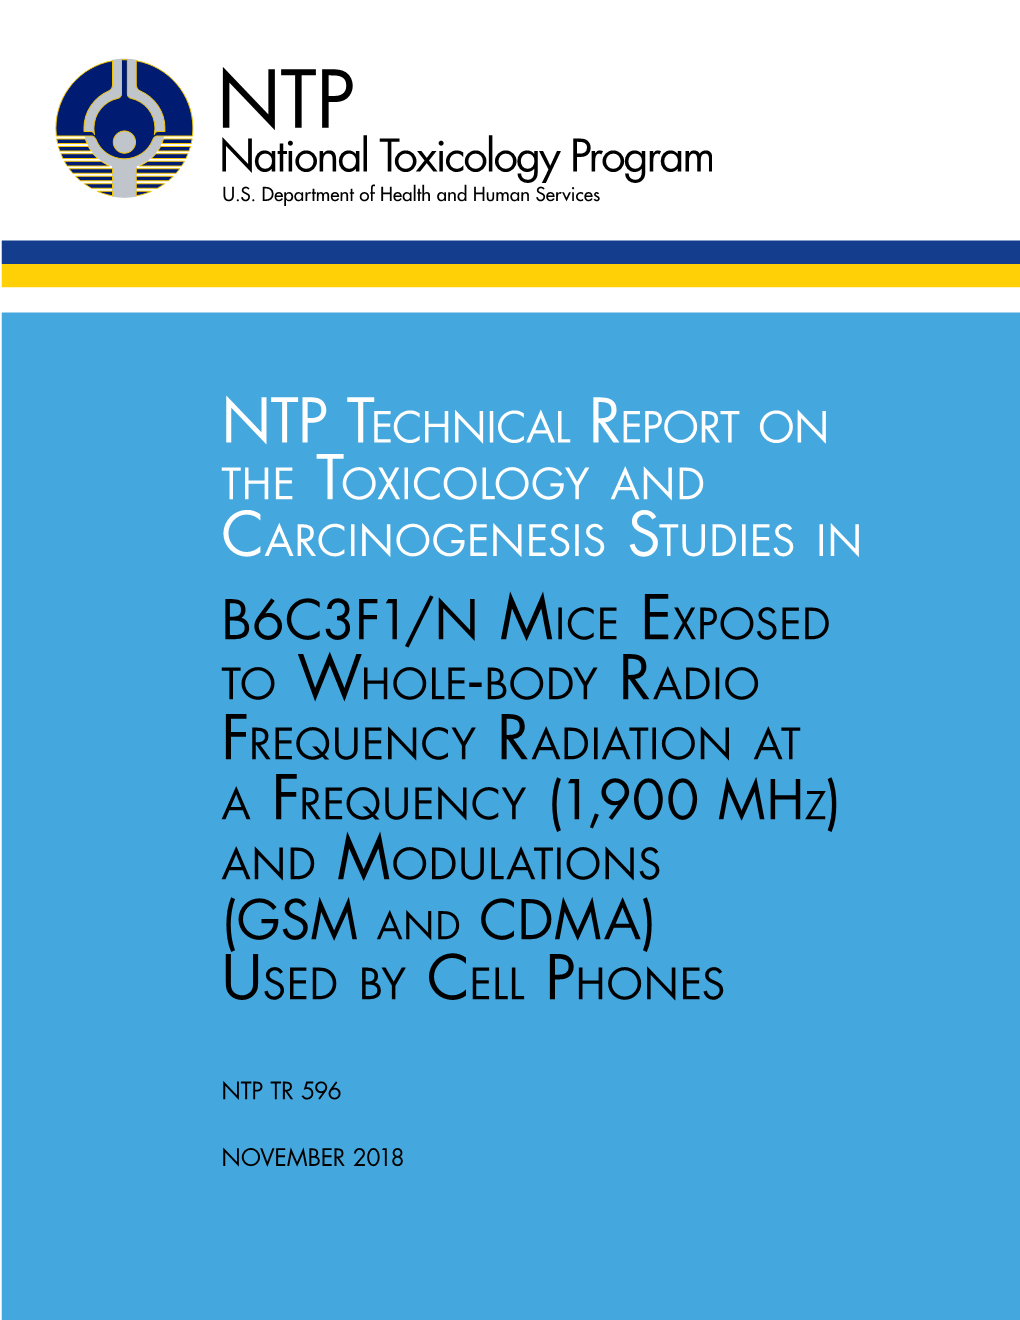 TR-596 Report Series: NTP Technical Report Series Report Series Number: 596 Official Citation: National Toxicology Program (NTP)